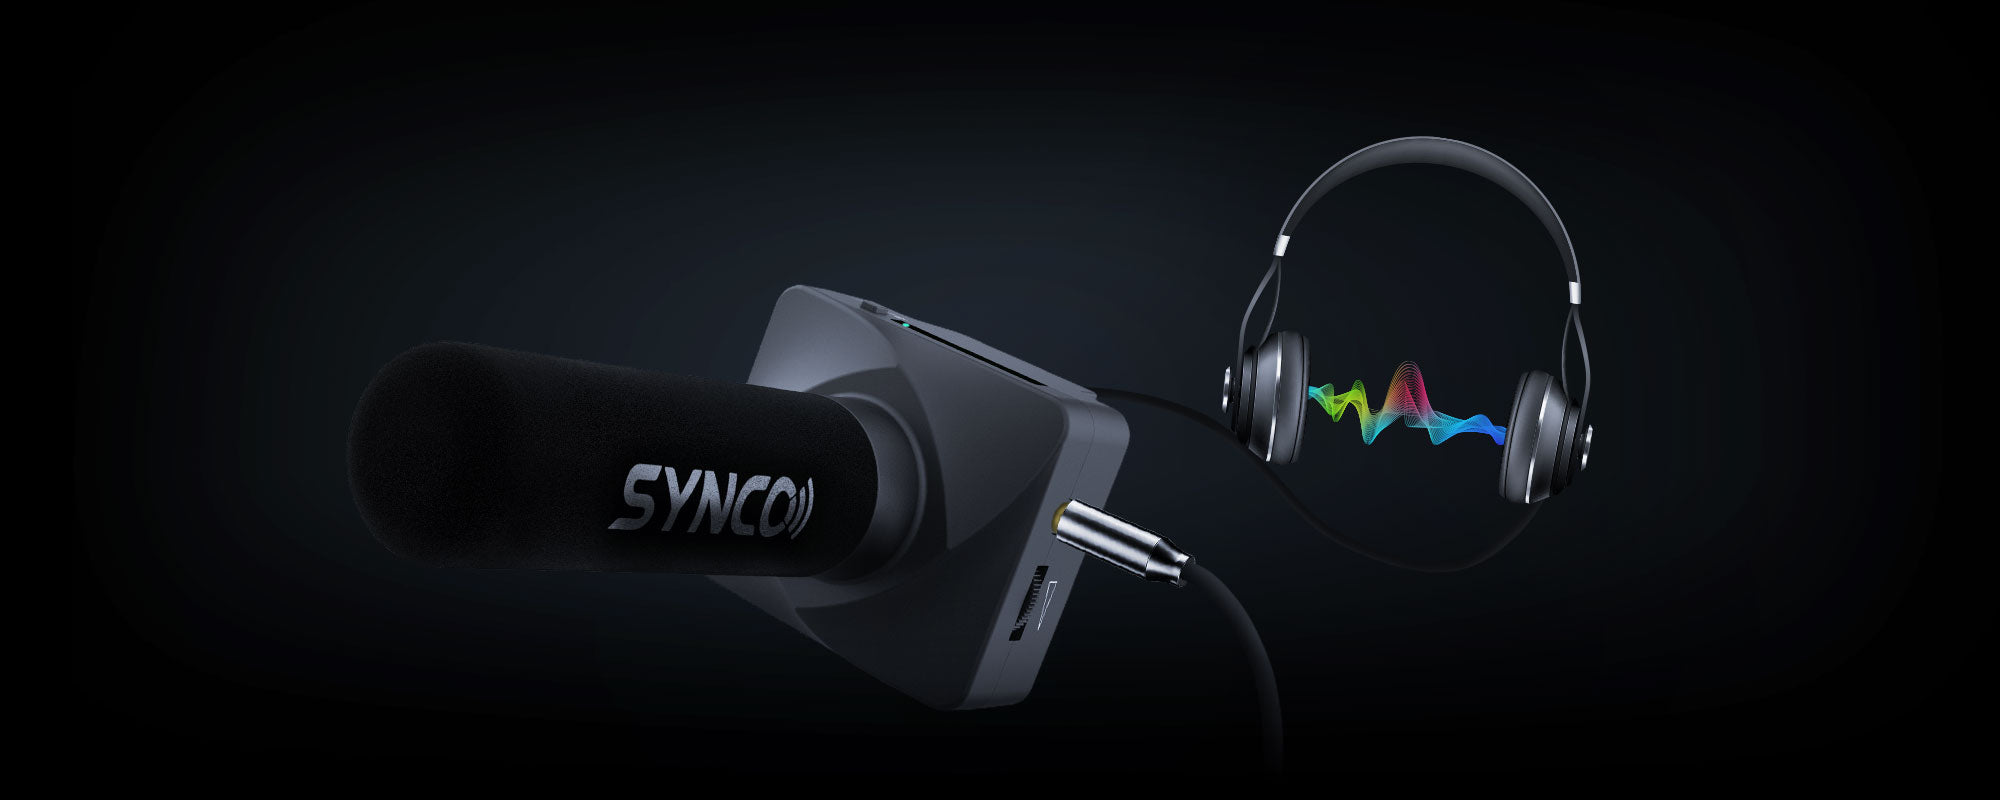 SYNCO U3 shotgun microphone for iPhone features a 3.5mm jack for real-time monitoring.